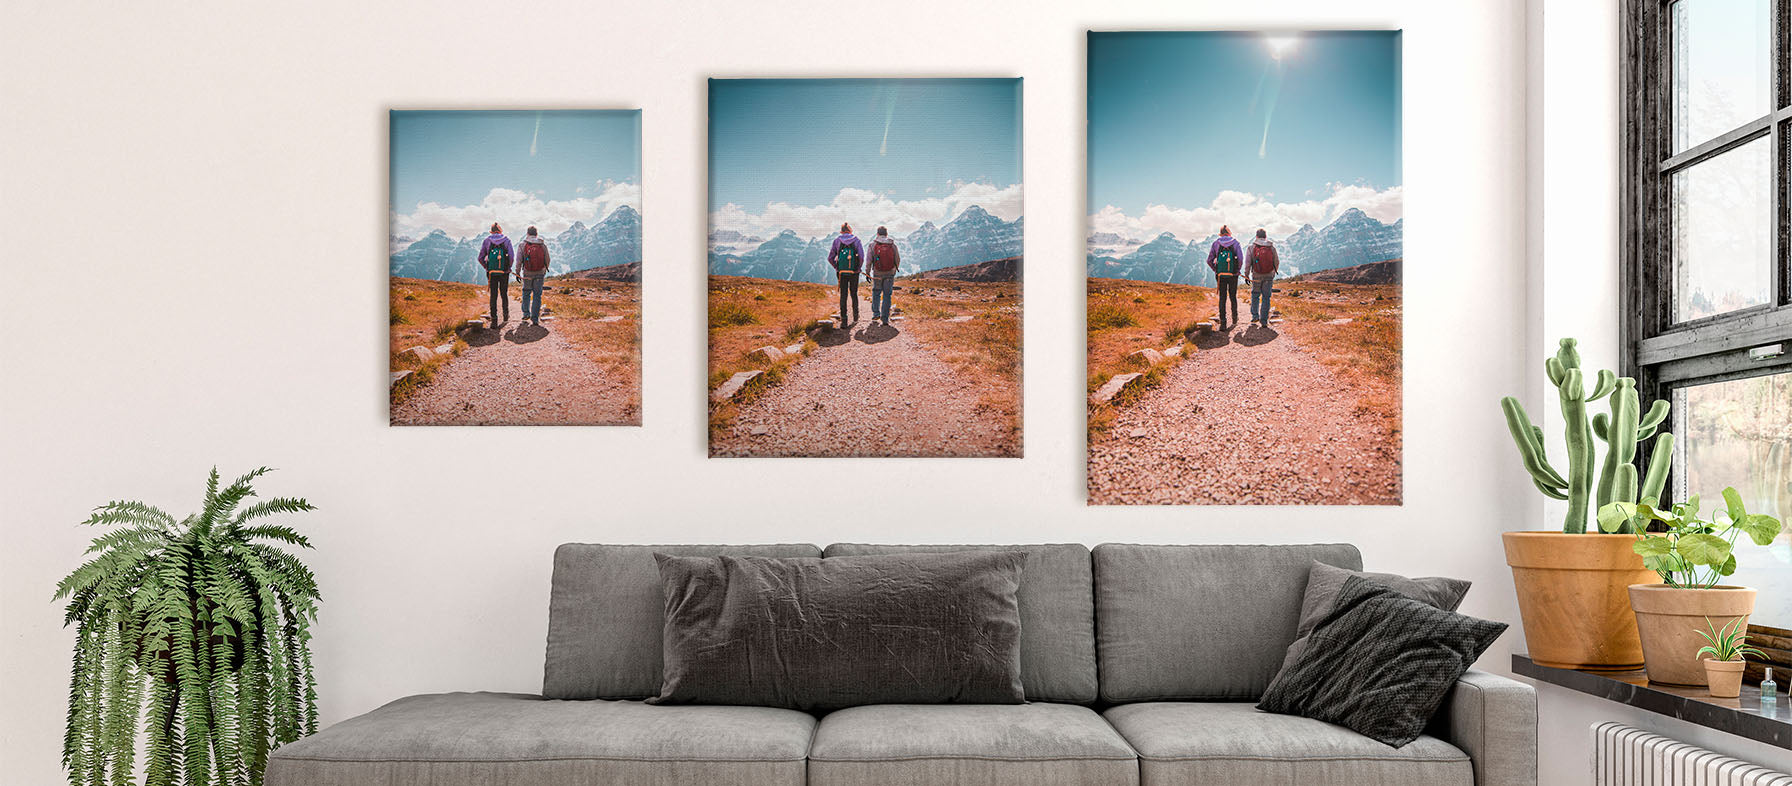 3 canvas photo prints hang on a wall. They are different size ratios to show how an image is cropped differently depending on its ratio.